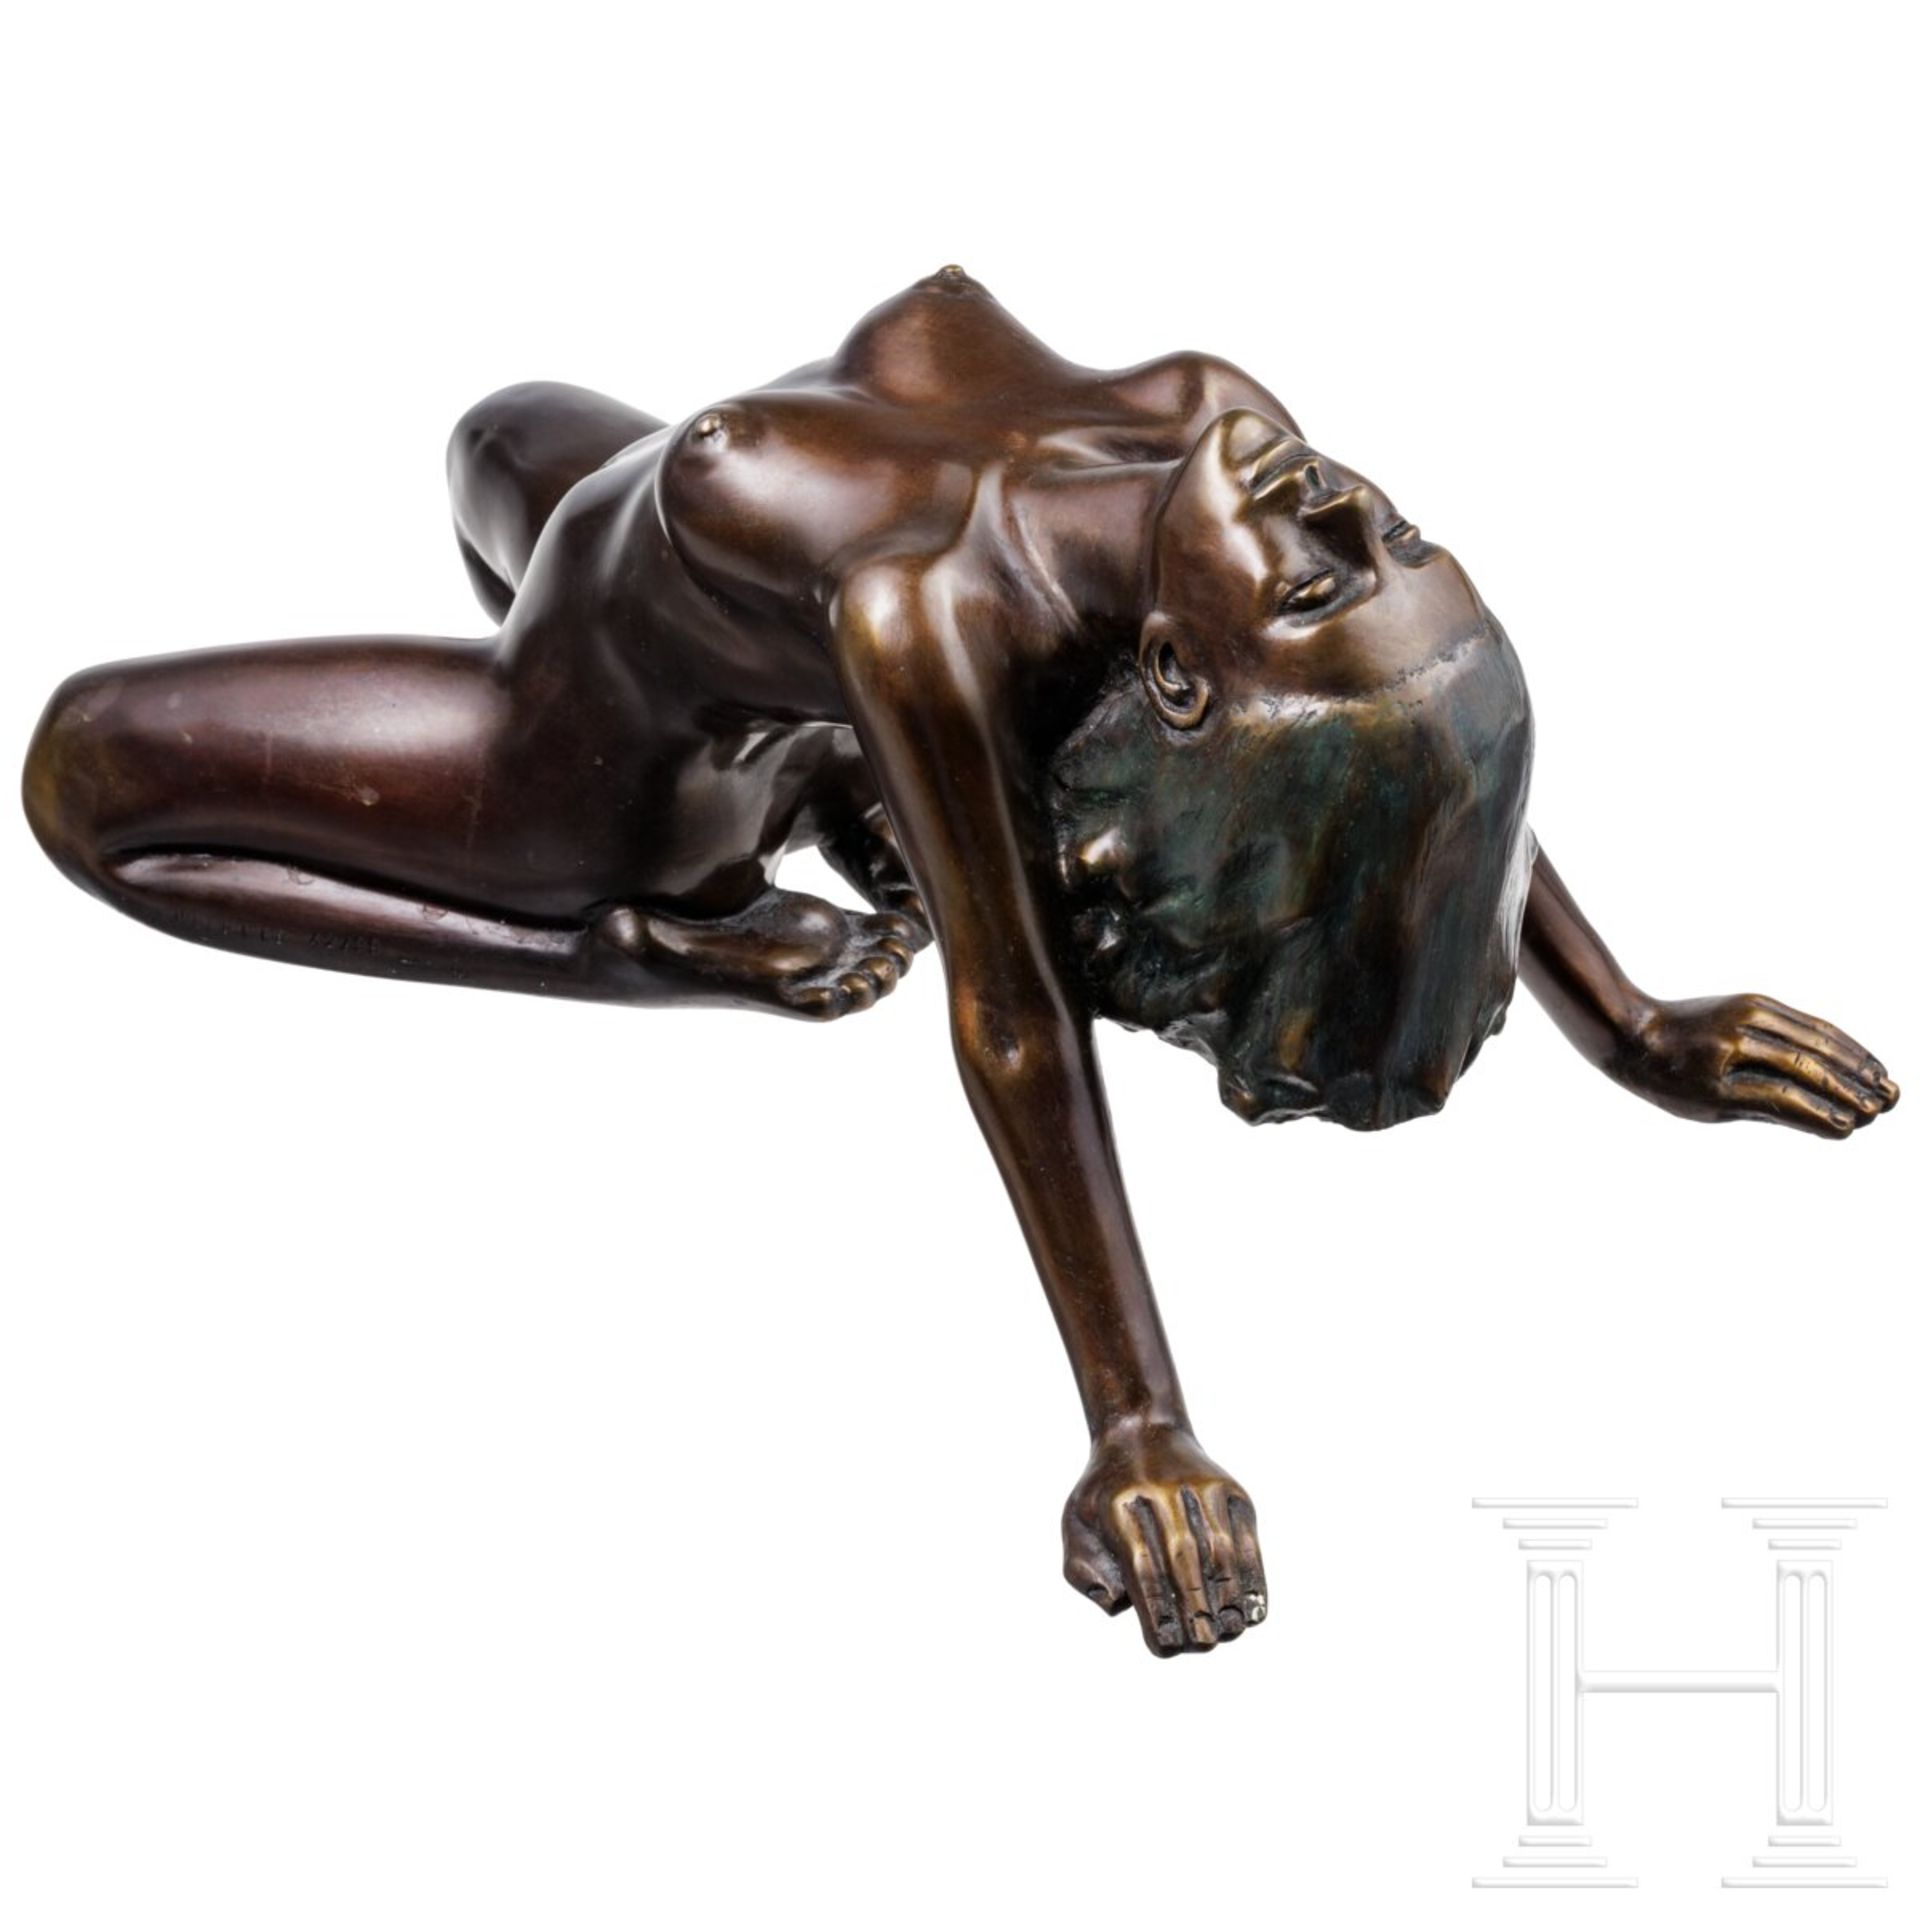 Peter Hohberger (geb. 1939) - "Aglaia", Akt in Bronze - Image 4 of 6